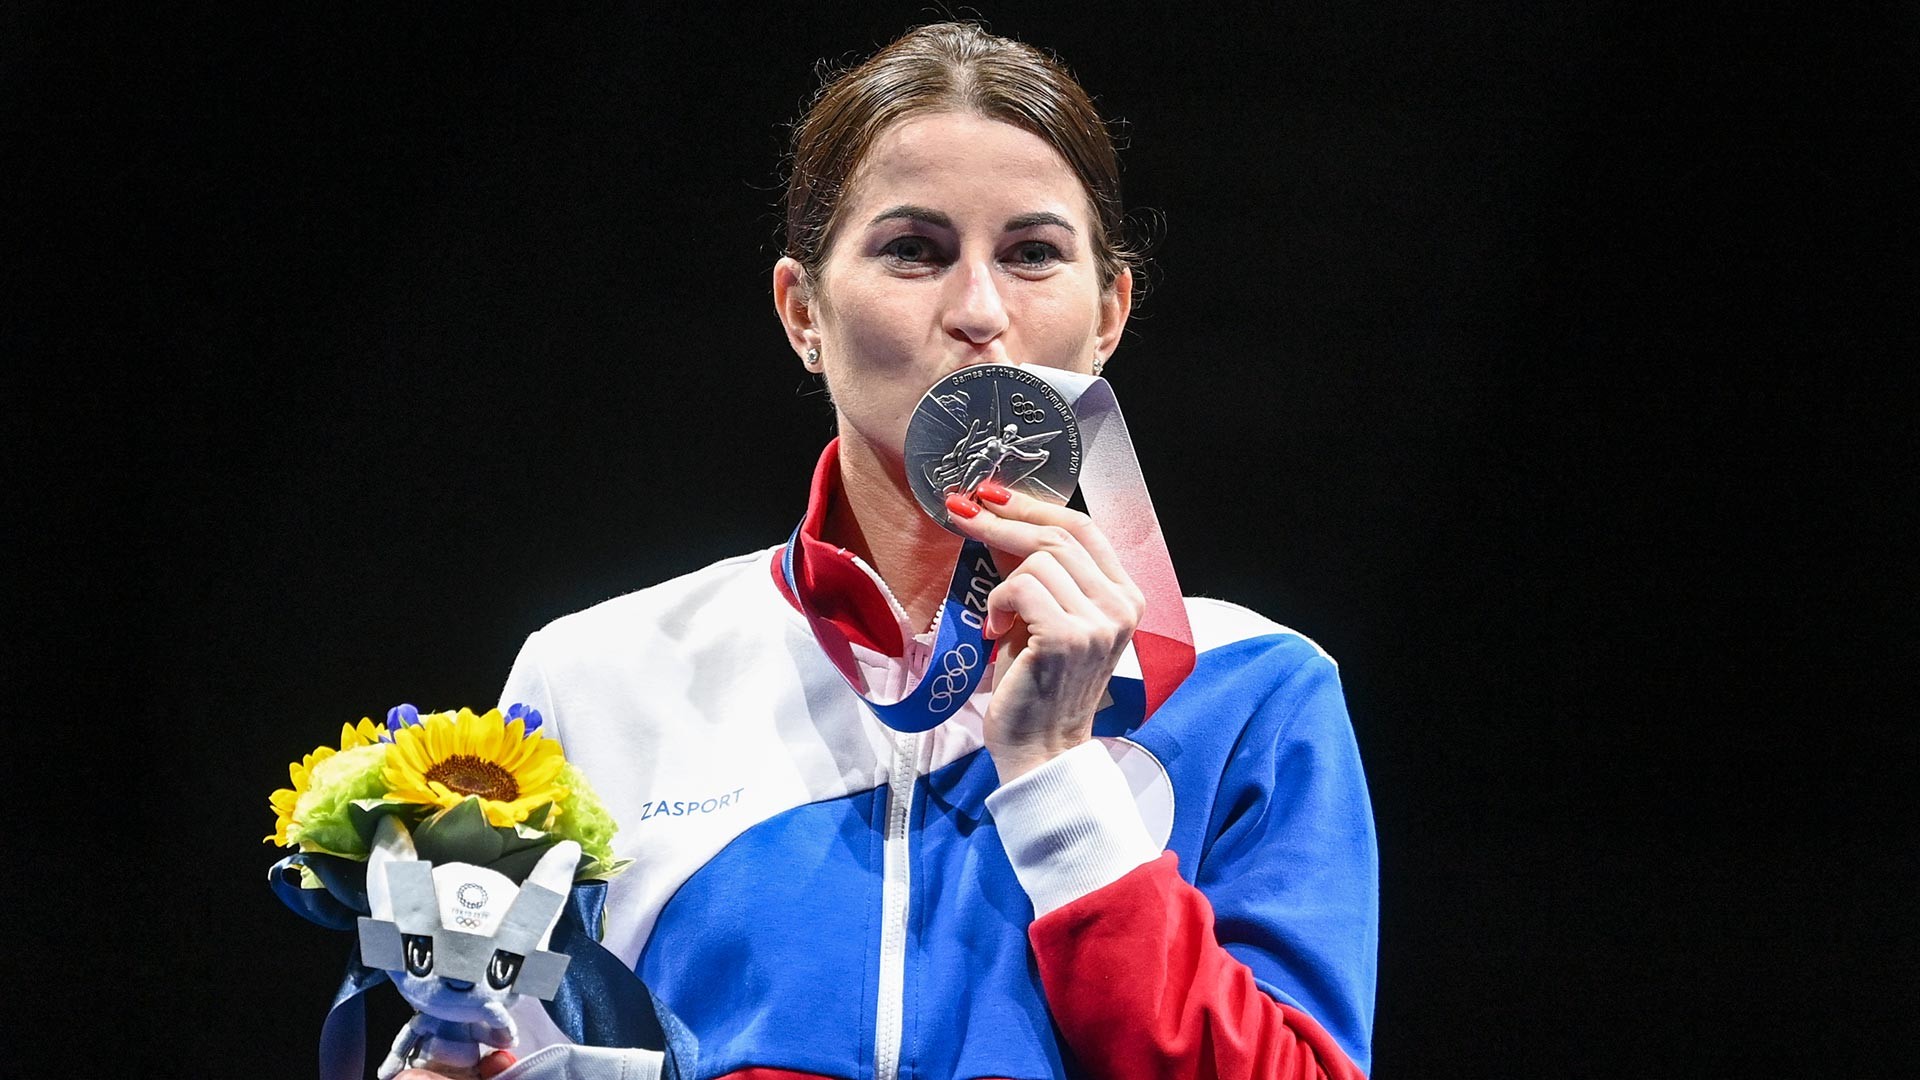 Russian athlete Inna Deriglazova, a member of the Russian national team (ROC team), who won the silver medal in the women's foil fencing competition at the XXXII Summer Olympics in Tokyo